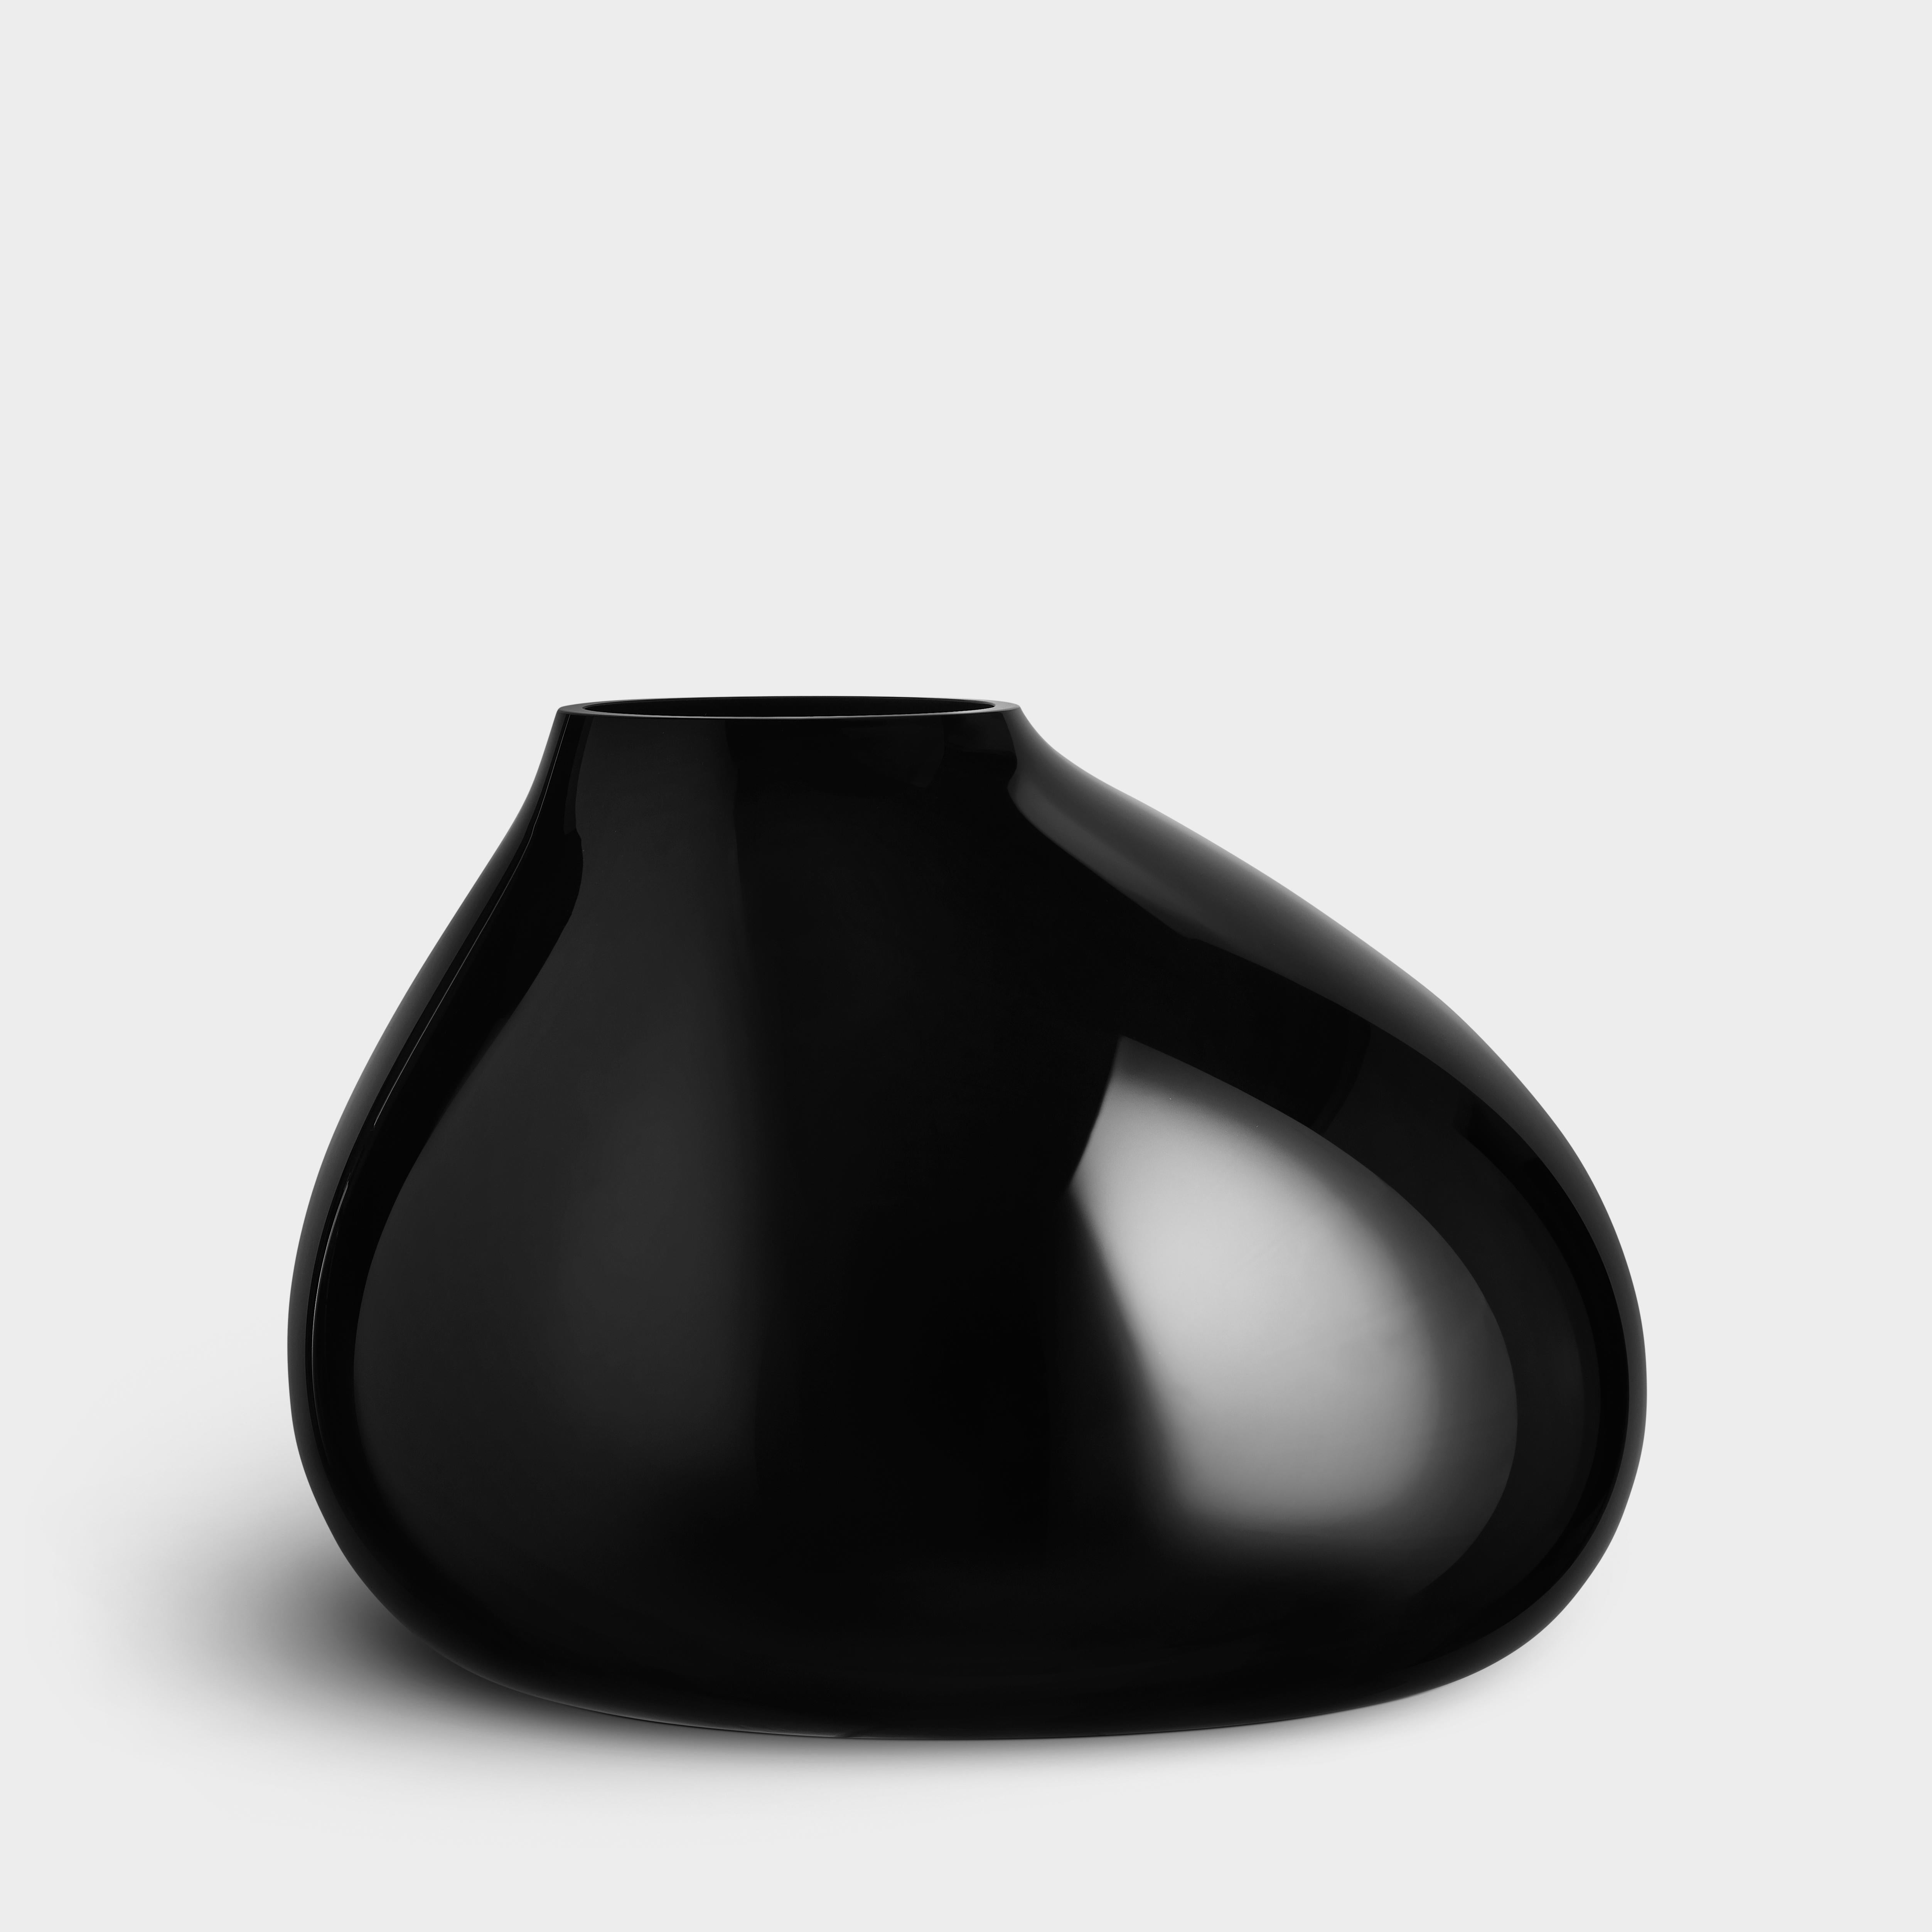 Ebon from Orrefors is a mouth-blown vase made in Sweden. The shape begins from a basic template, to which the glassblower adds the finishing touch. Each vase is, therefore, individually made within a strict framework. The object has an opaque black